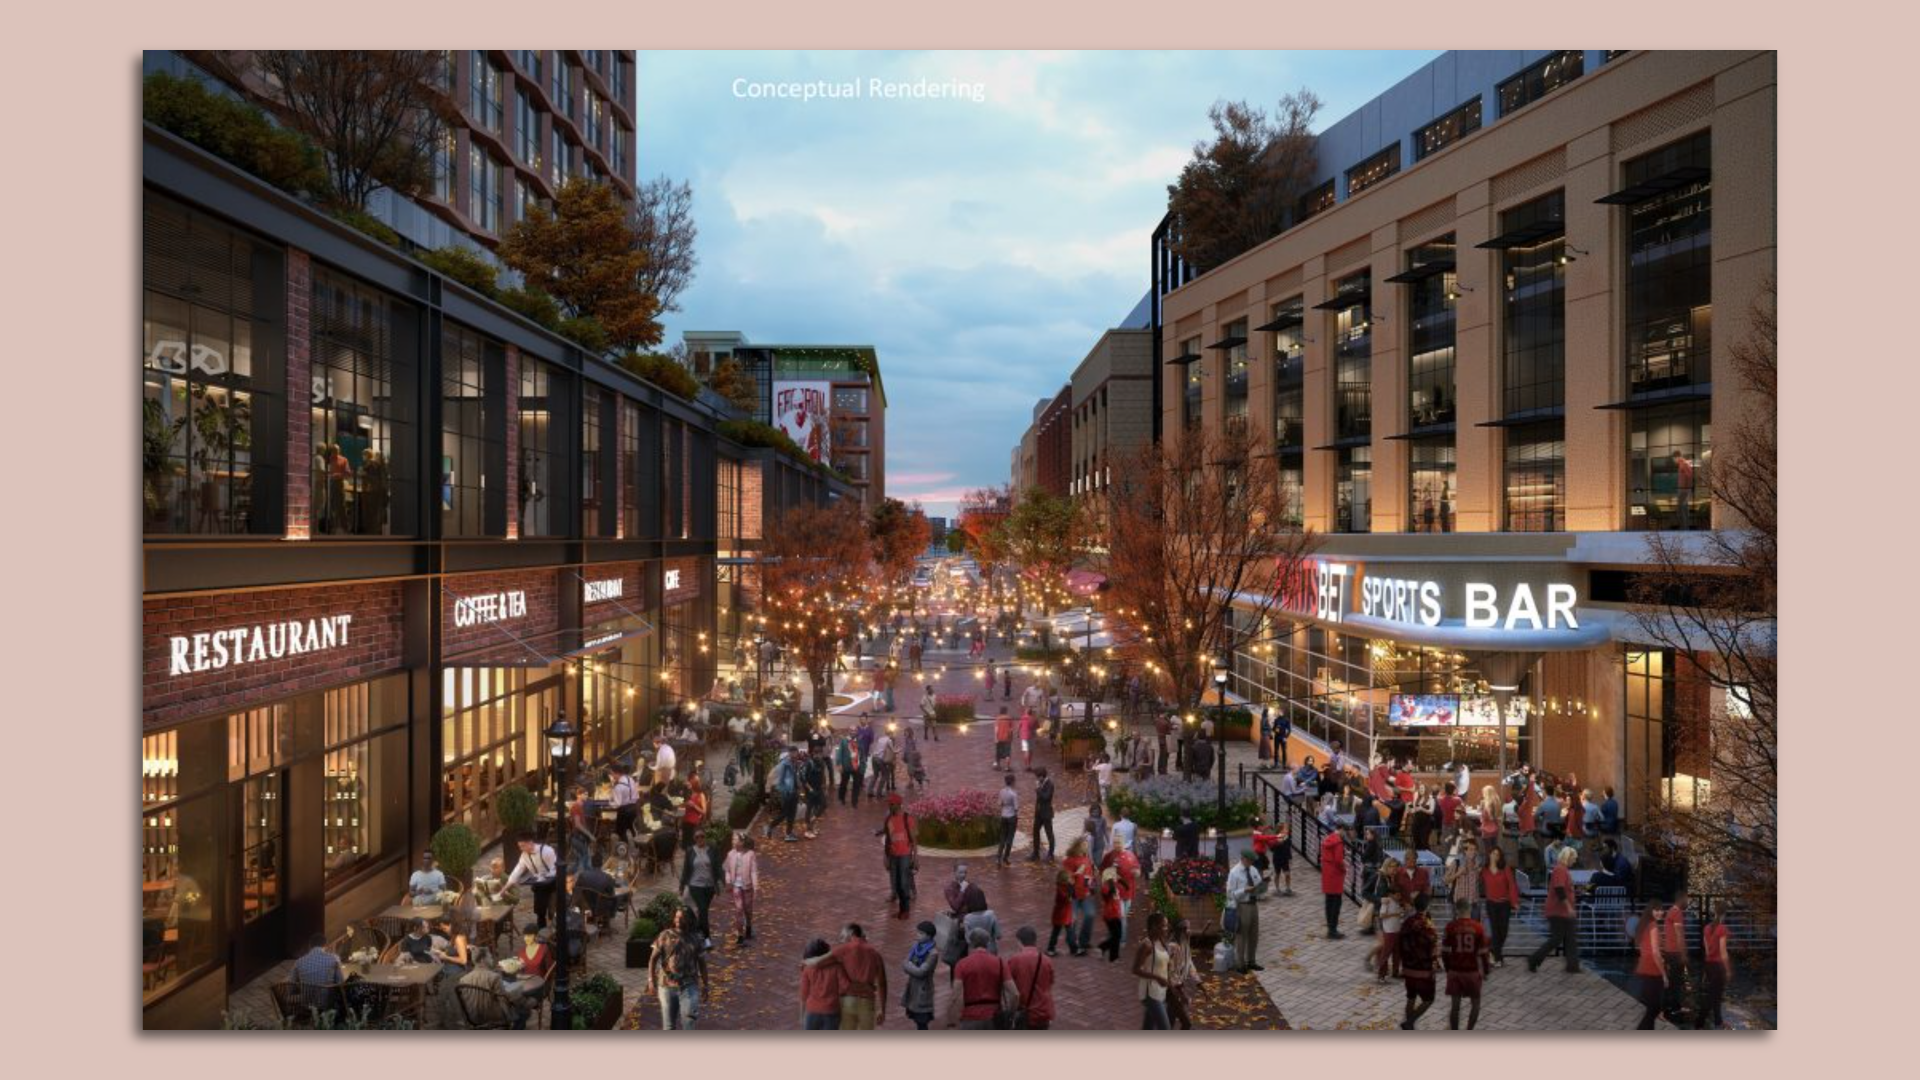 A rendering shows a bustling street with shops in District Detroit.